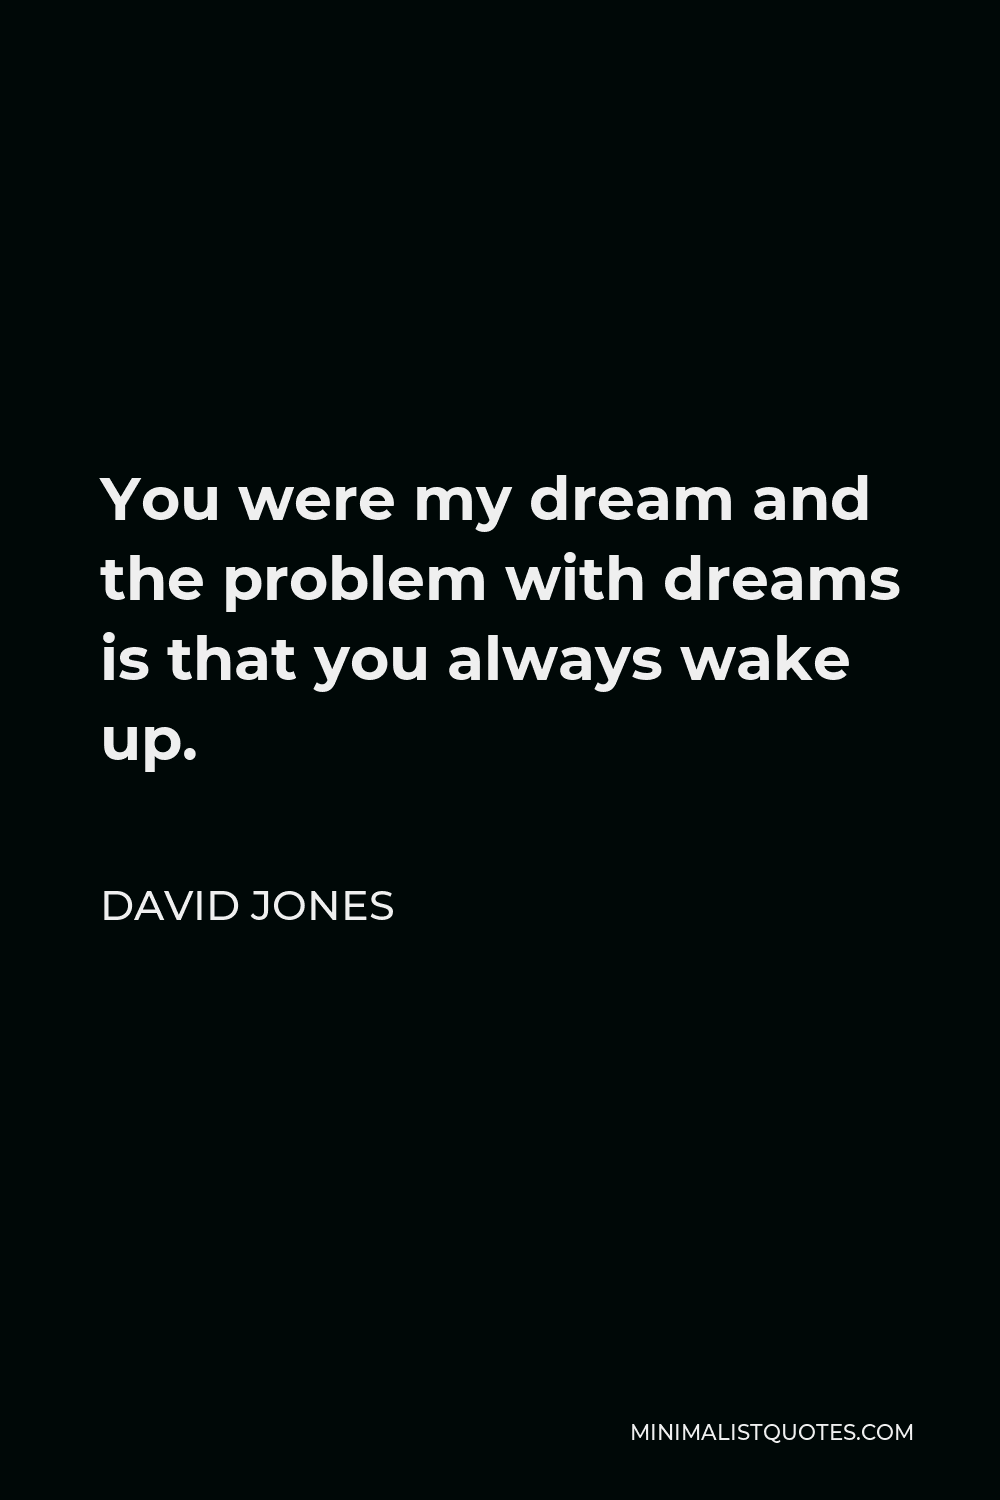 David Jones Quote You Were My Dream And The Problem With Dreams Is That You Always Wake Up